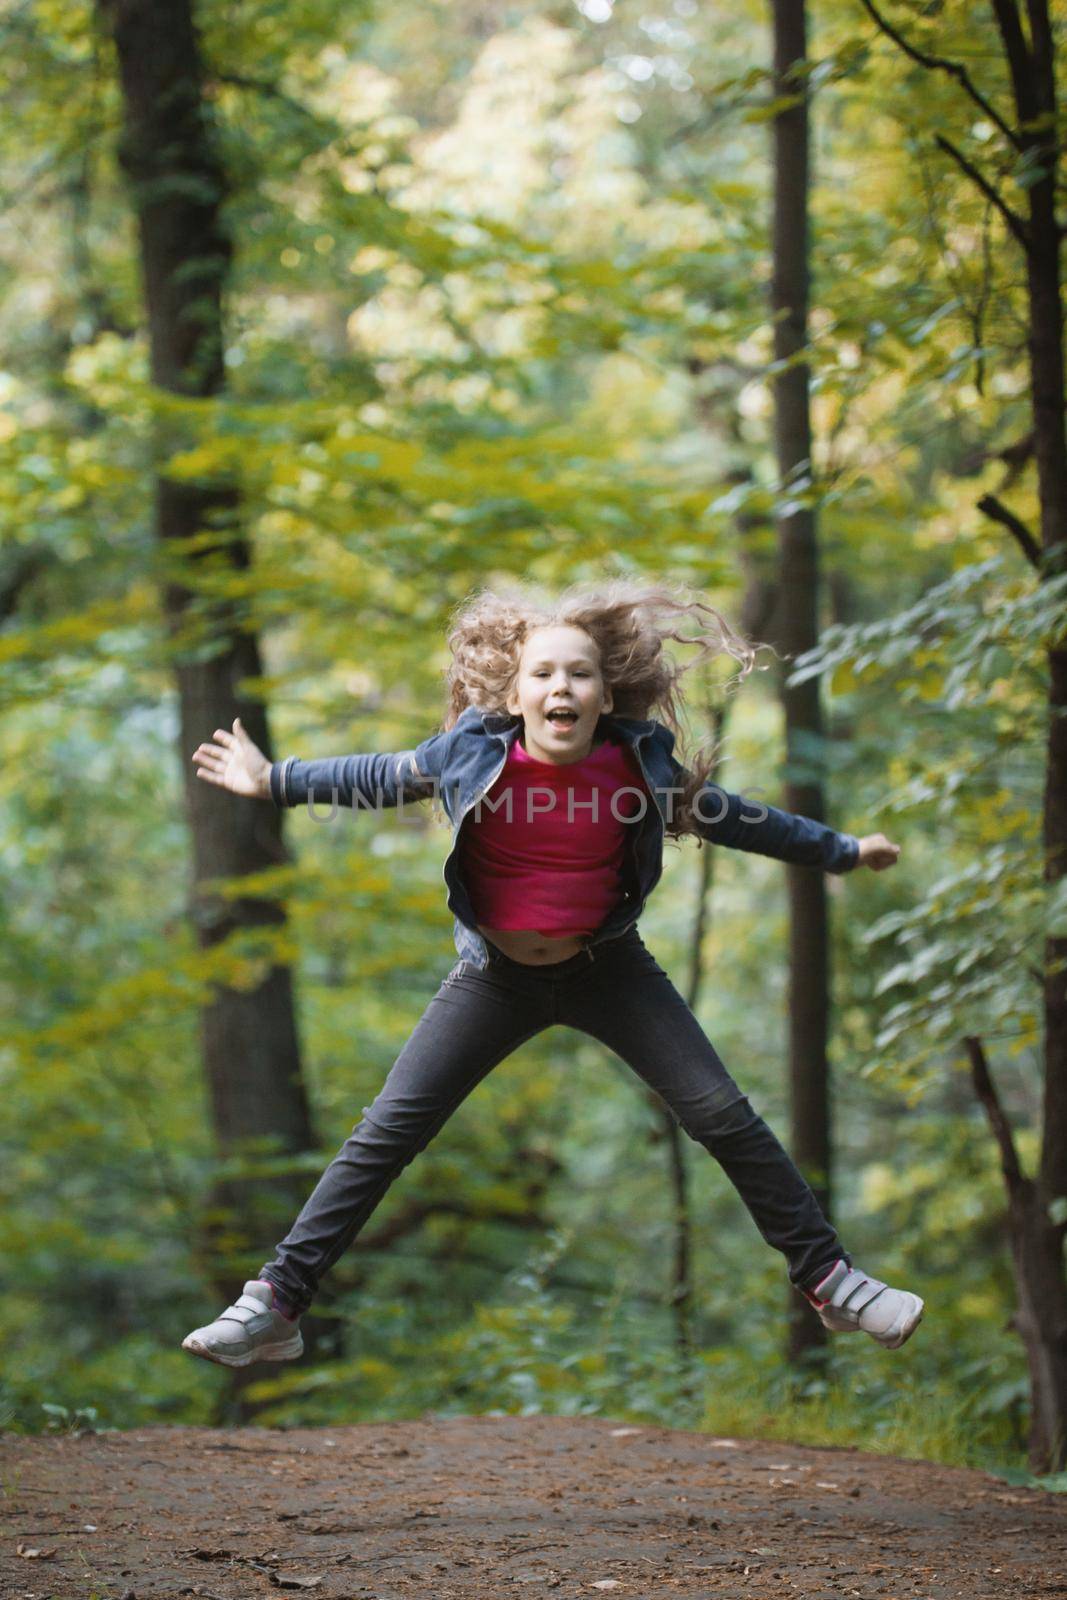 Little smiling girl child wearing jeans jacket - is jumping in park, outdoor portrait